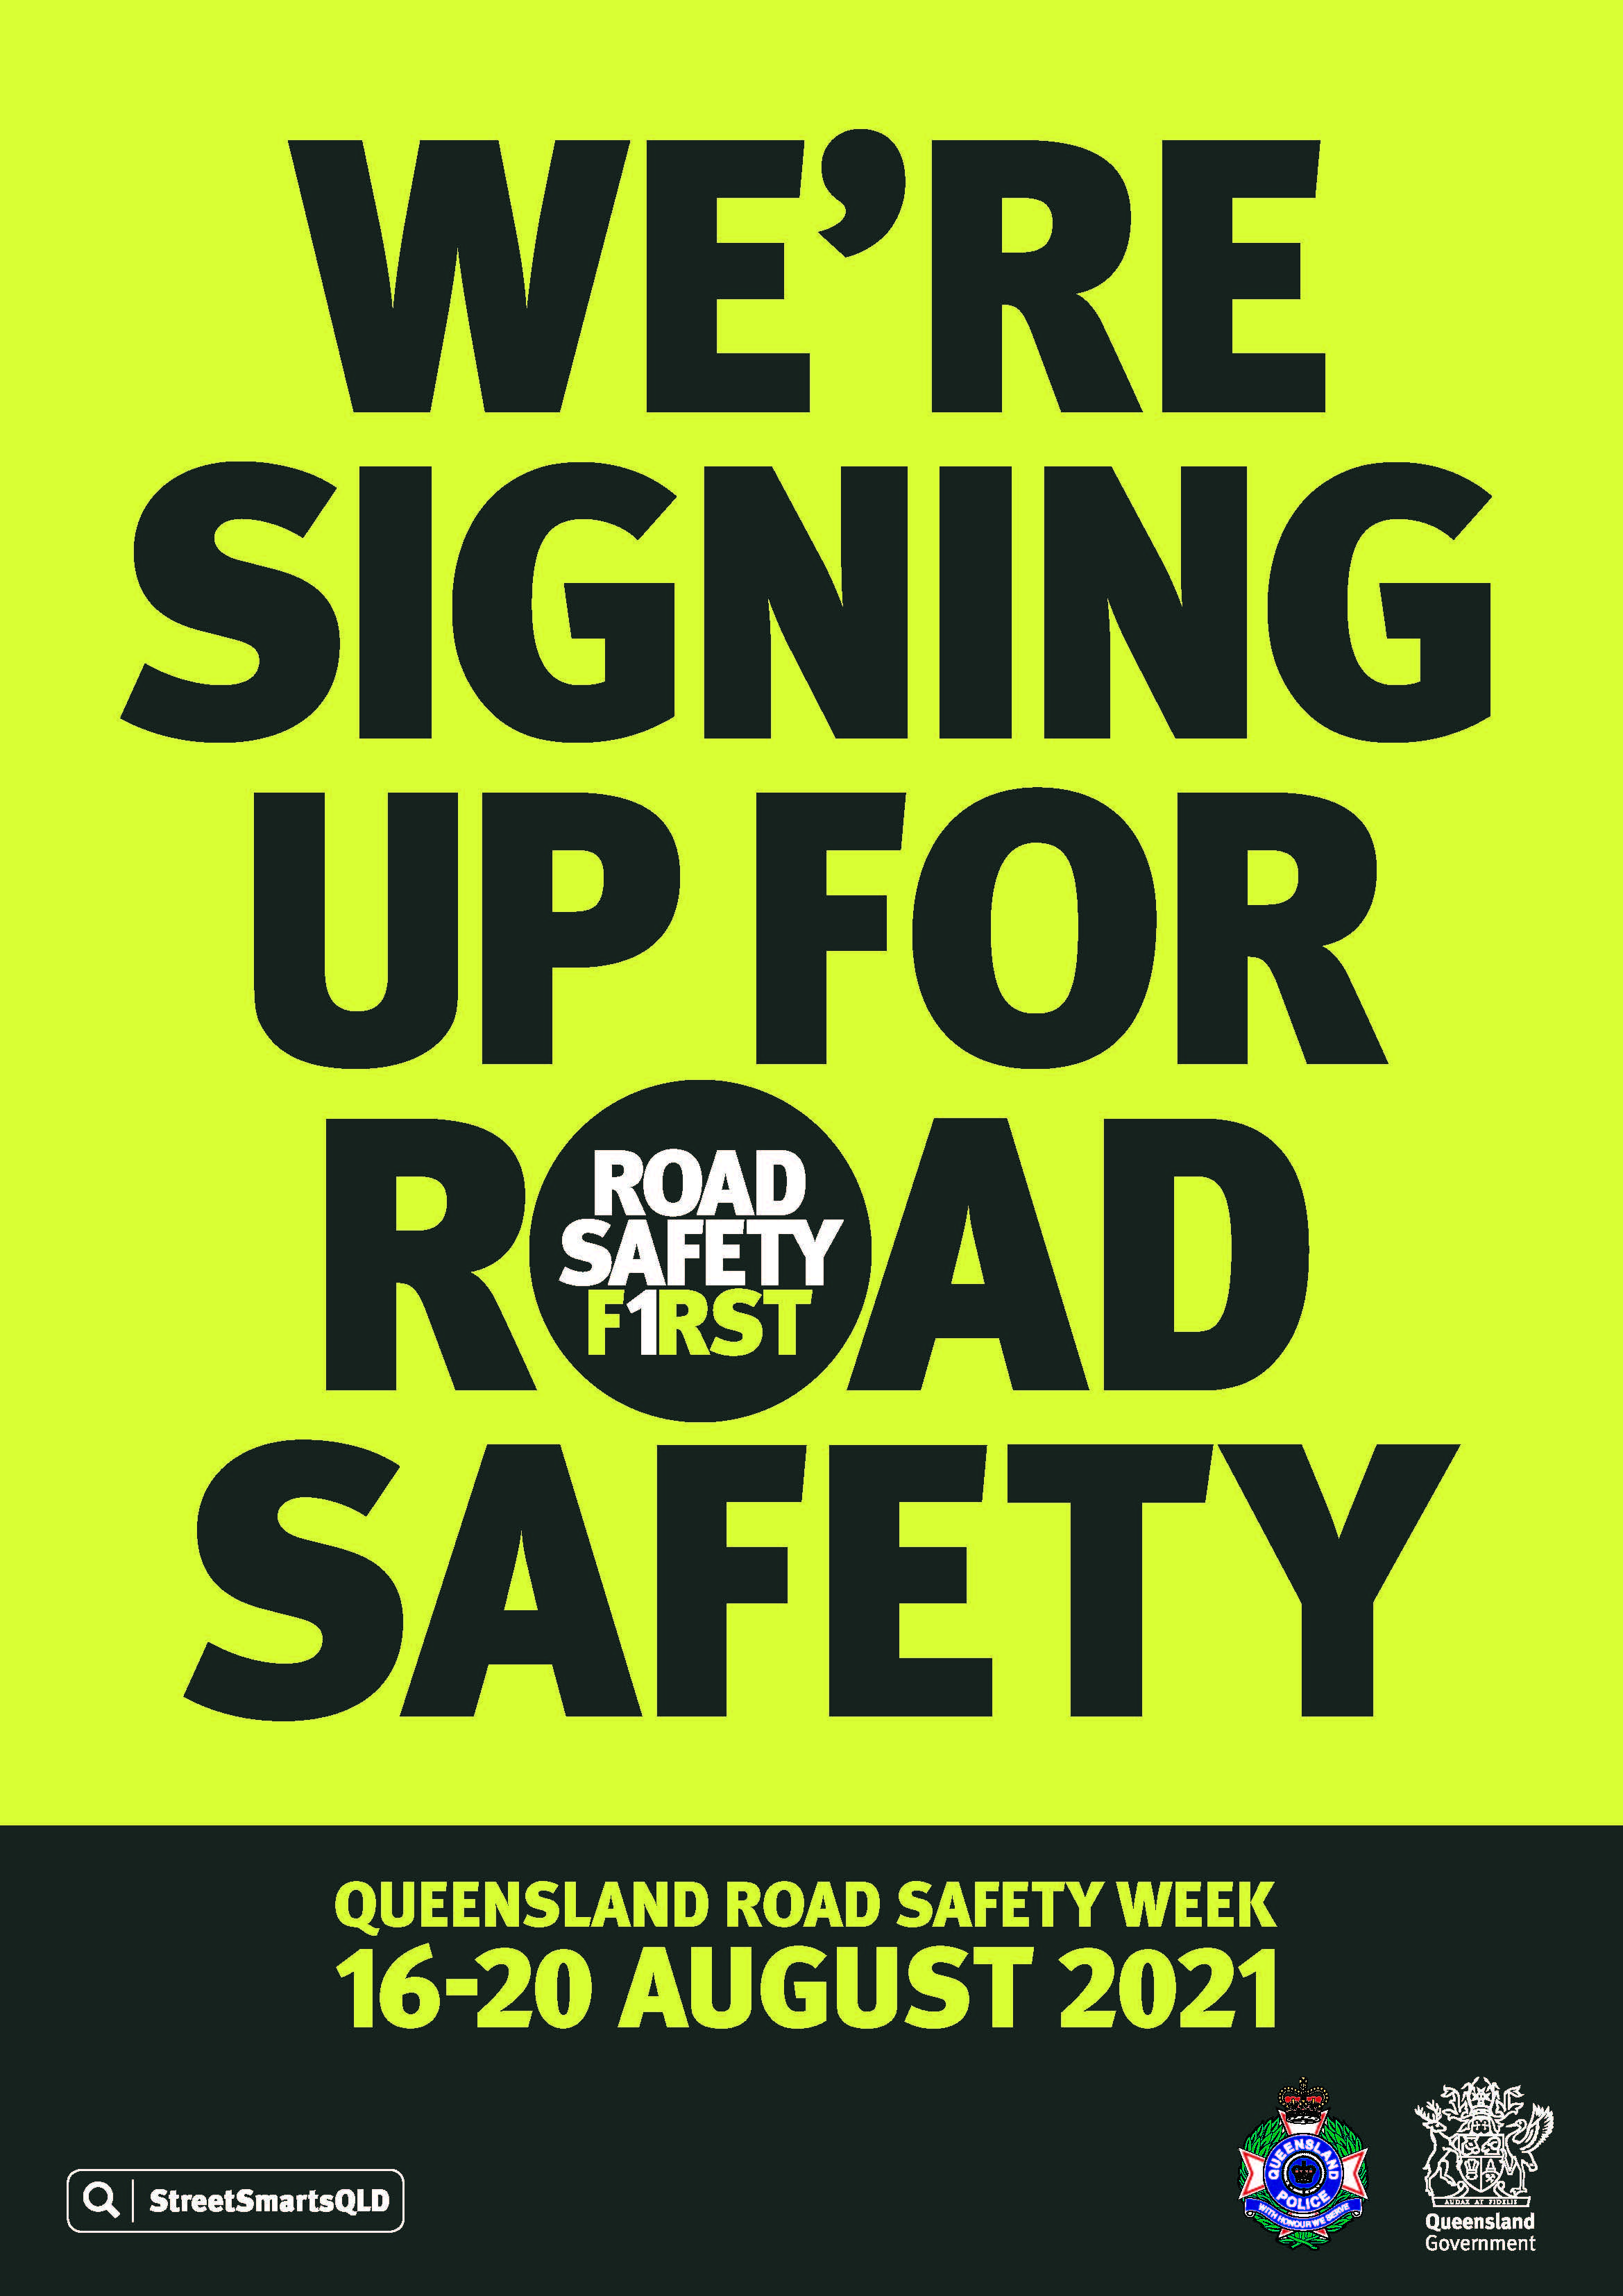 Images (3): Queensland Road Safety Week Posters